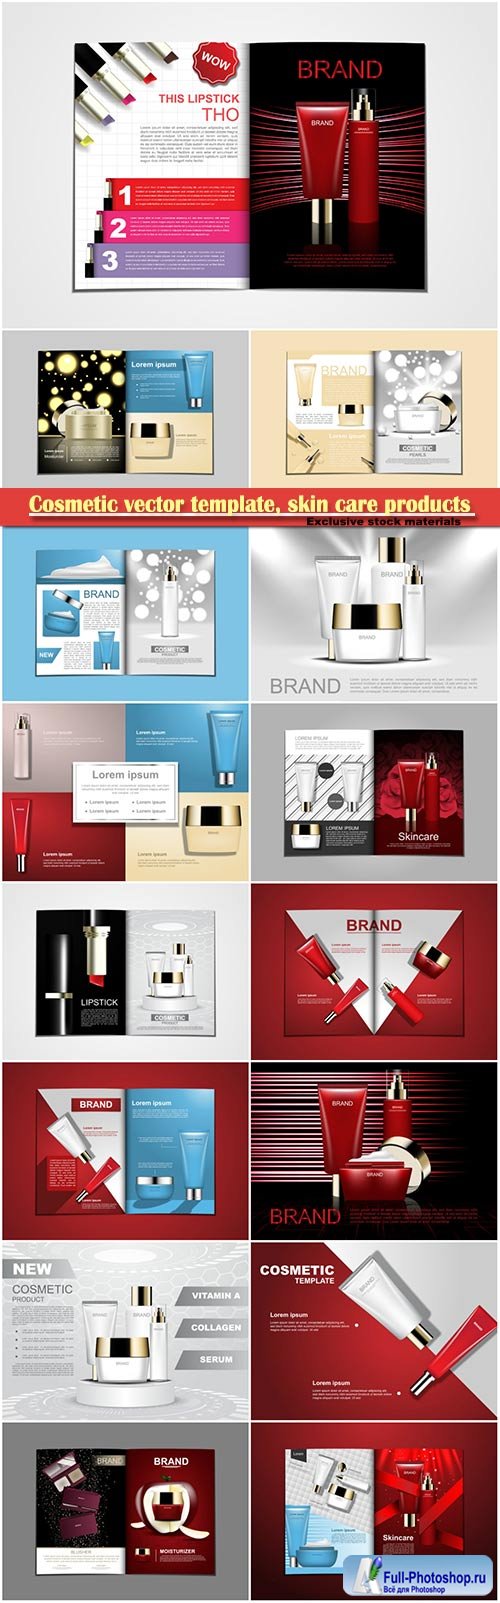 Cosmetic vector template, skin care products concept